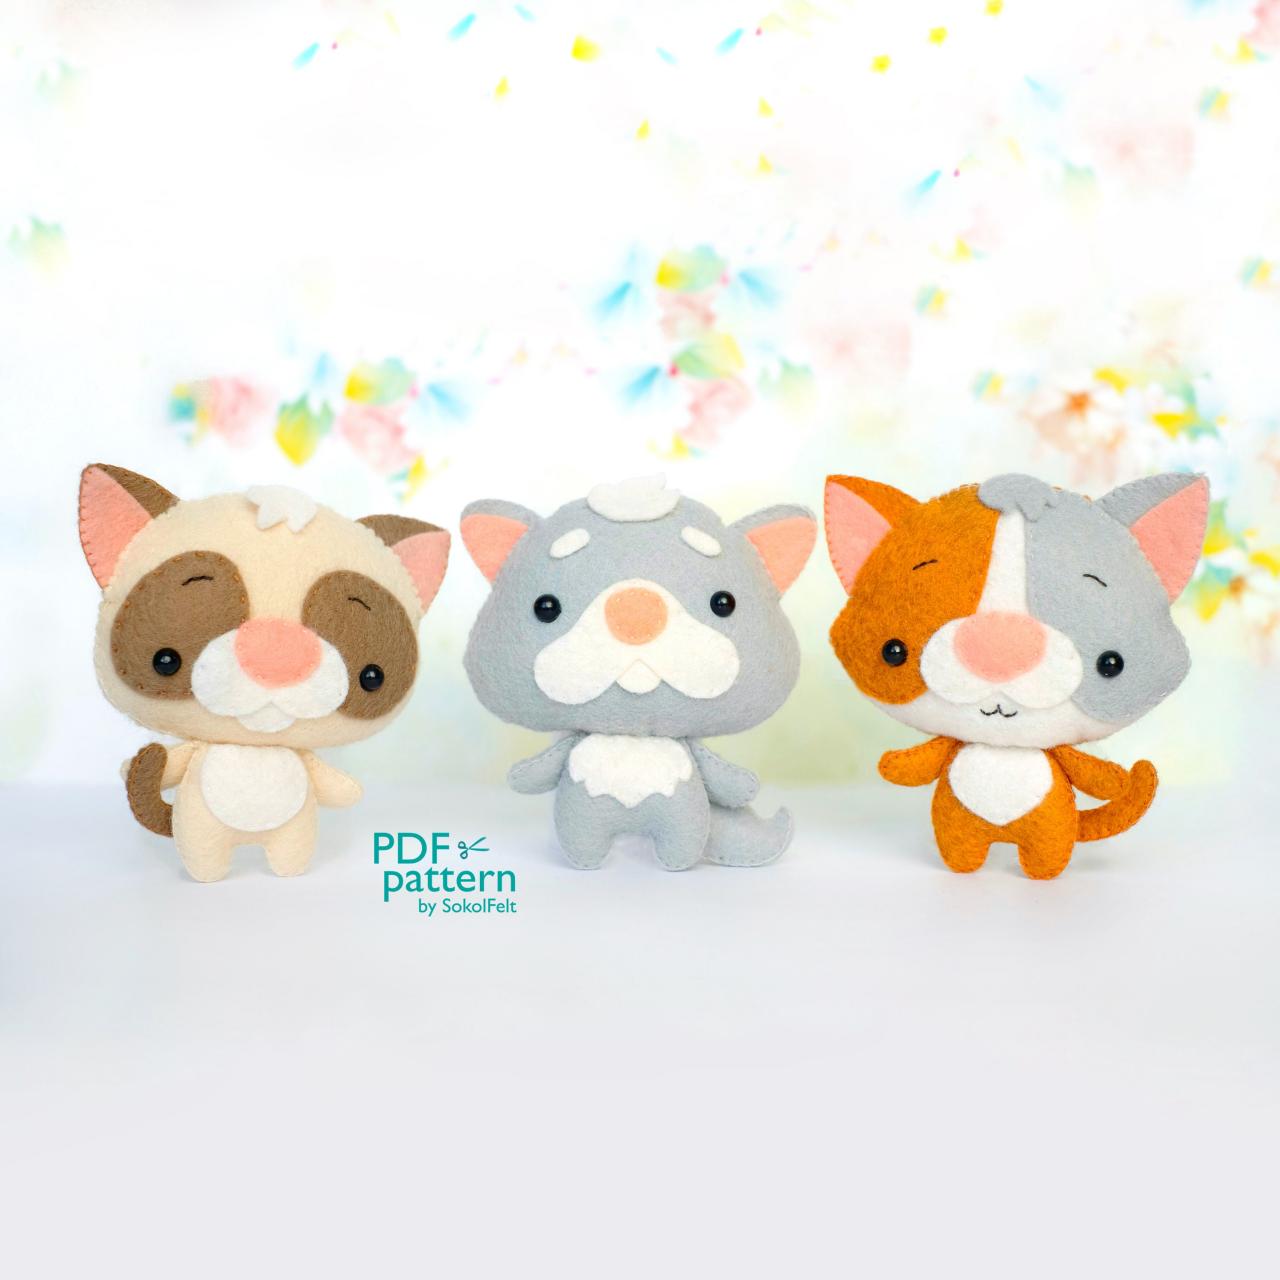 Three cute cats felt toy sewing PDF and SVG patterns, Persian, Ragdoll and Calico kittens plush toy, Felt pet pattern, Baby crib mobile toy